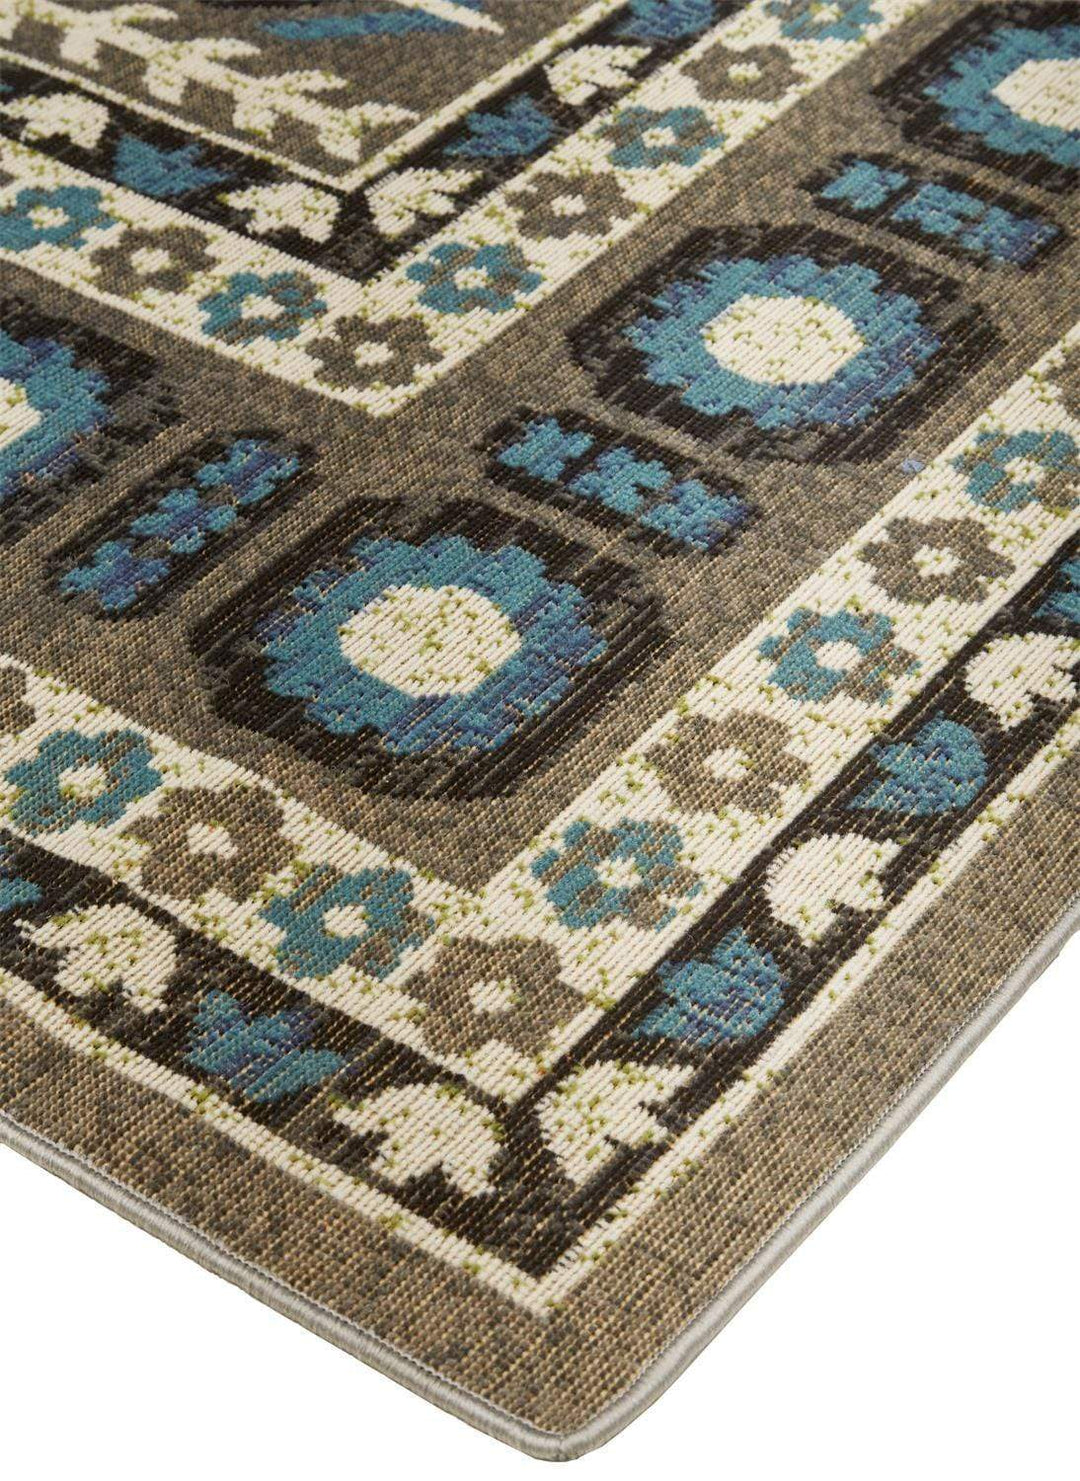 Feizy Feizy Foster Vinatge Style Kilim Rug - Dark Gray & Peacock Blue - Available in 7 Sizes